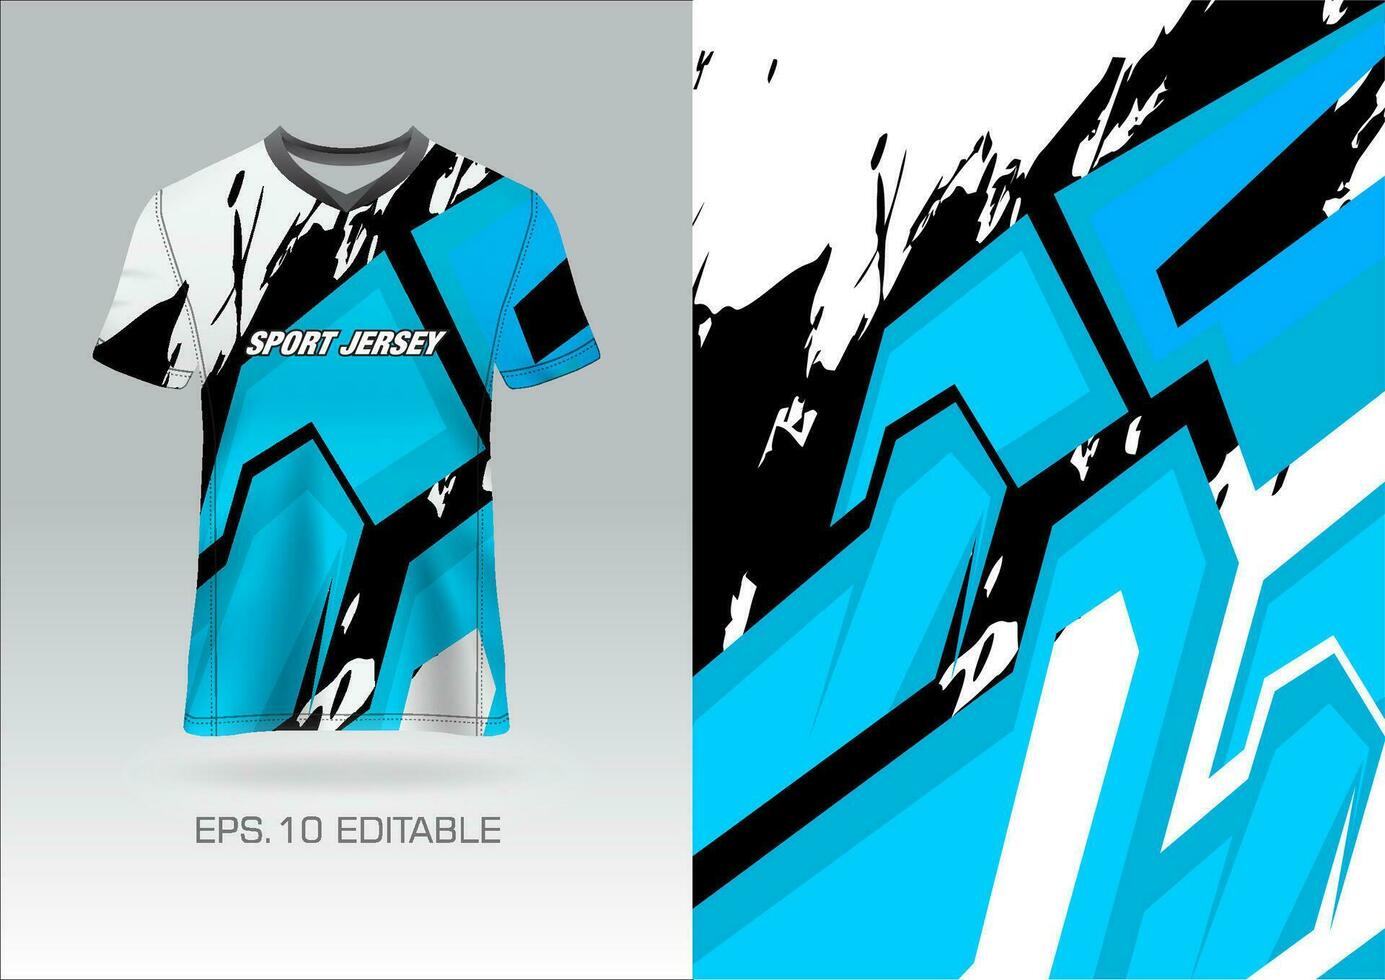 sport grunge t-shirt mock up design for extreme team jersey, racing, cycling, football, game, background, wallpaper. vector